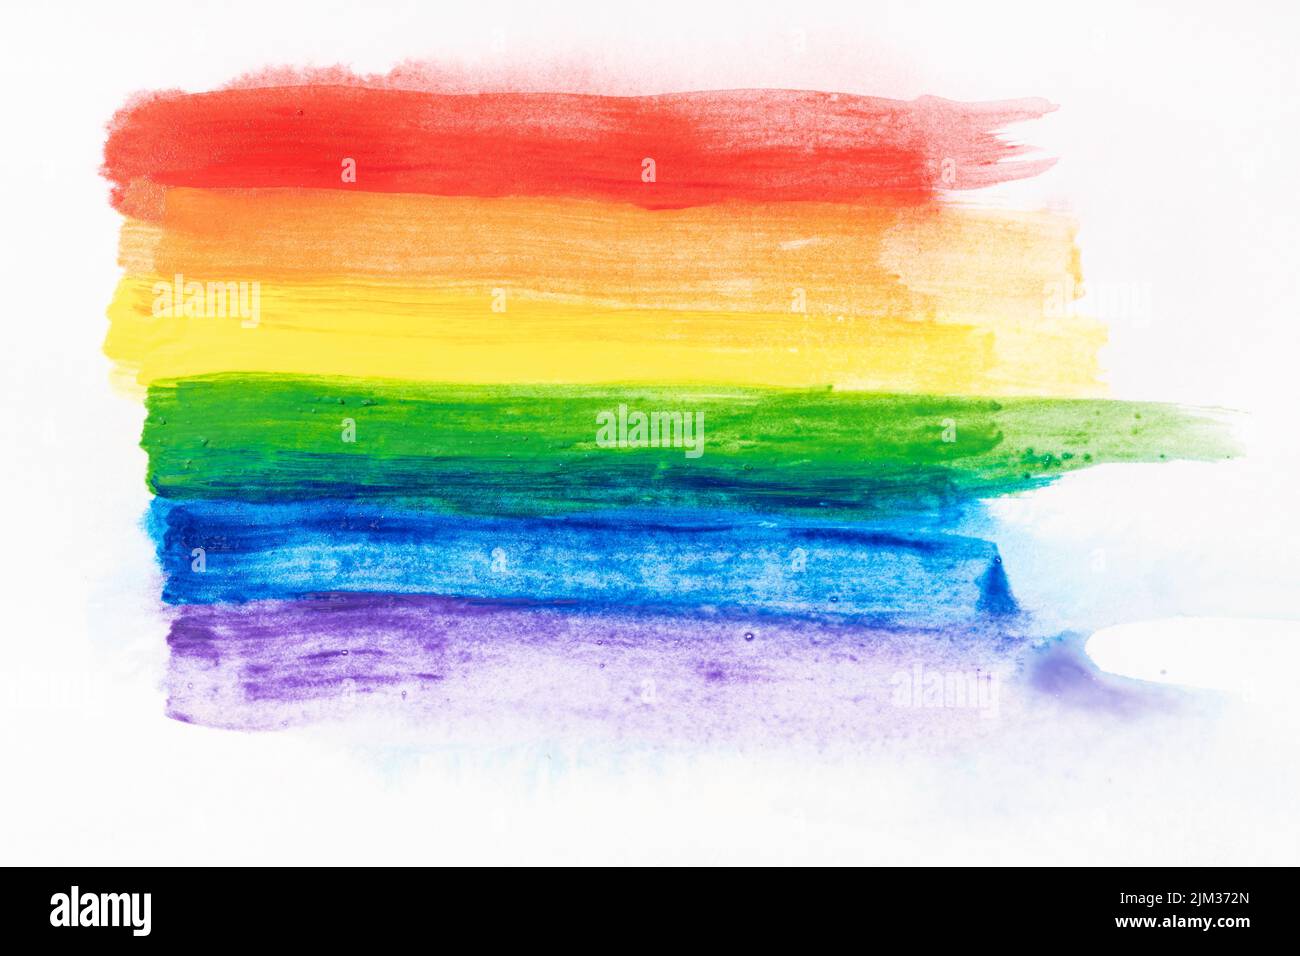 Rainbow pride flag hand painted with watercolors isolated on white canvas paper. LGBT Rainbow flag background Stock Photo